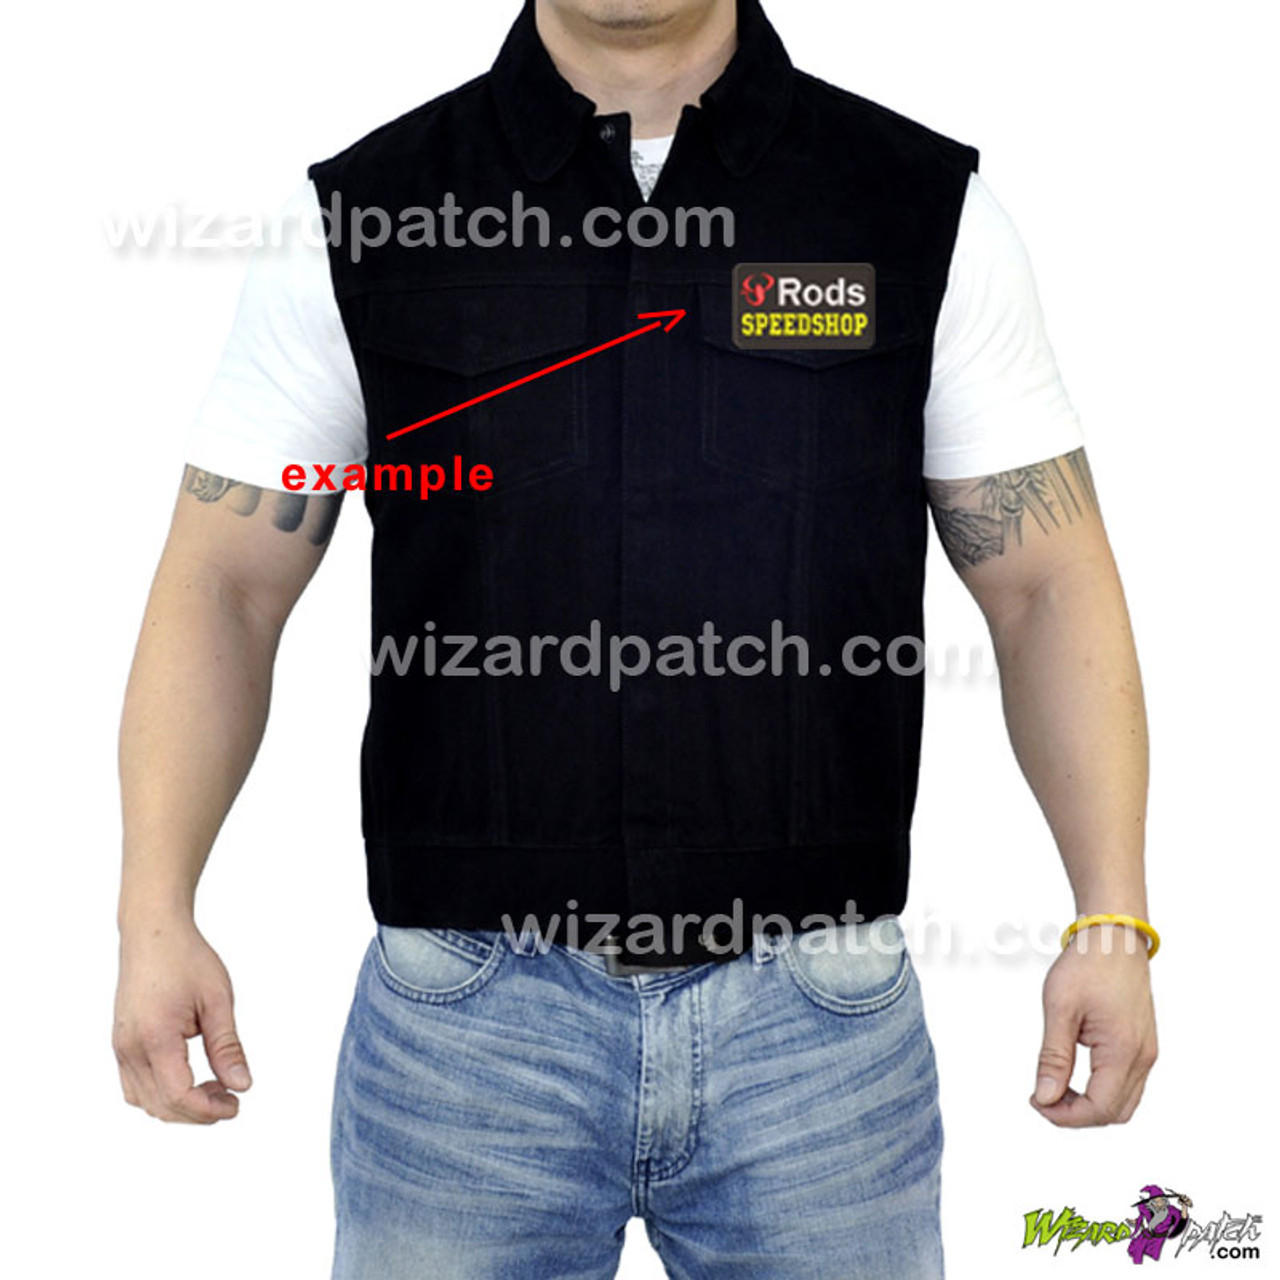 Vest Embroidered Police Patch 11x4 inches - Top Vest Patch Maker